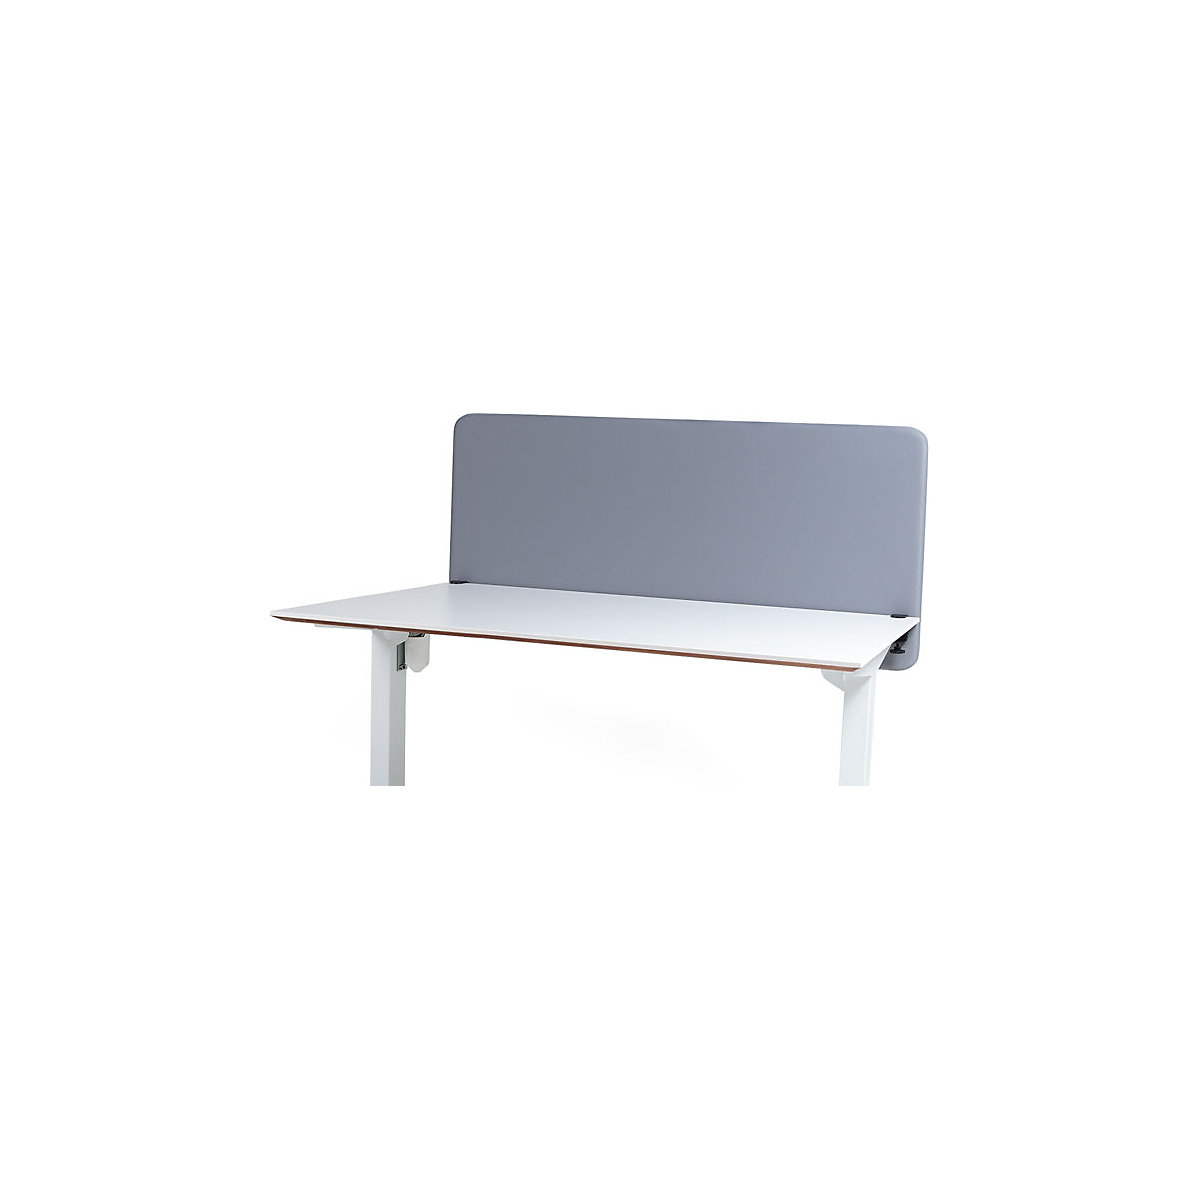 Softline Event acoustic desk partition, suspended downwards, HxW 650 x 1400 mm, fabric, light grey-2